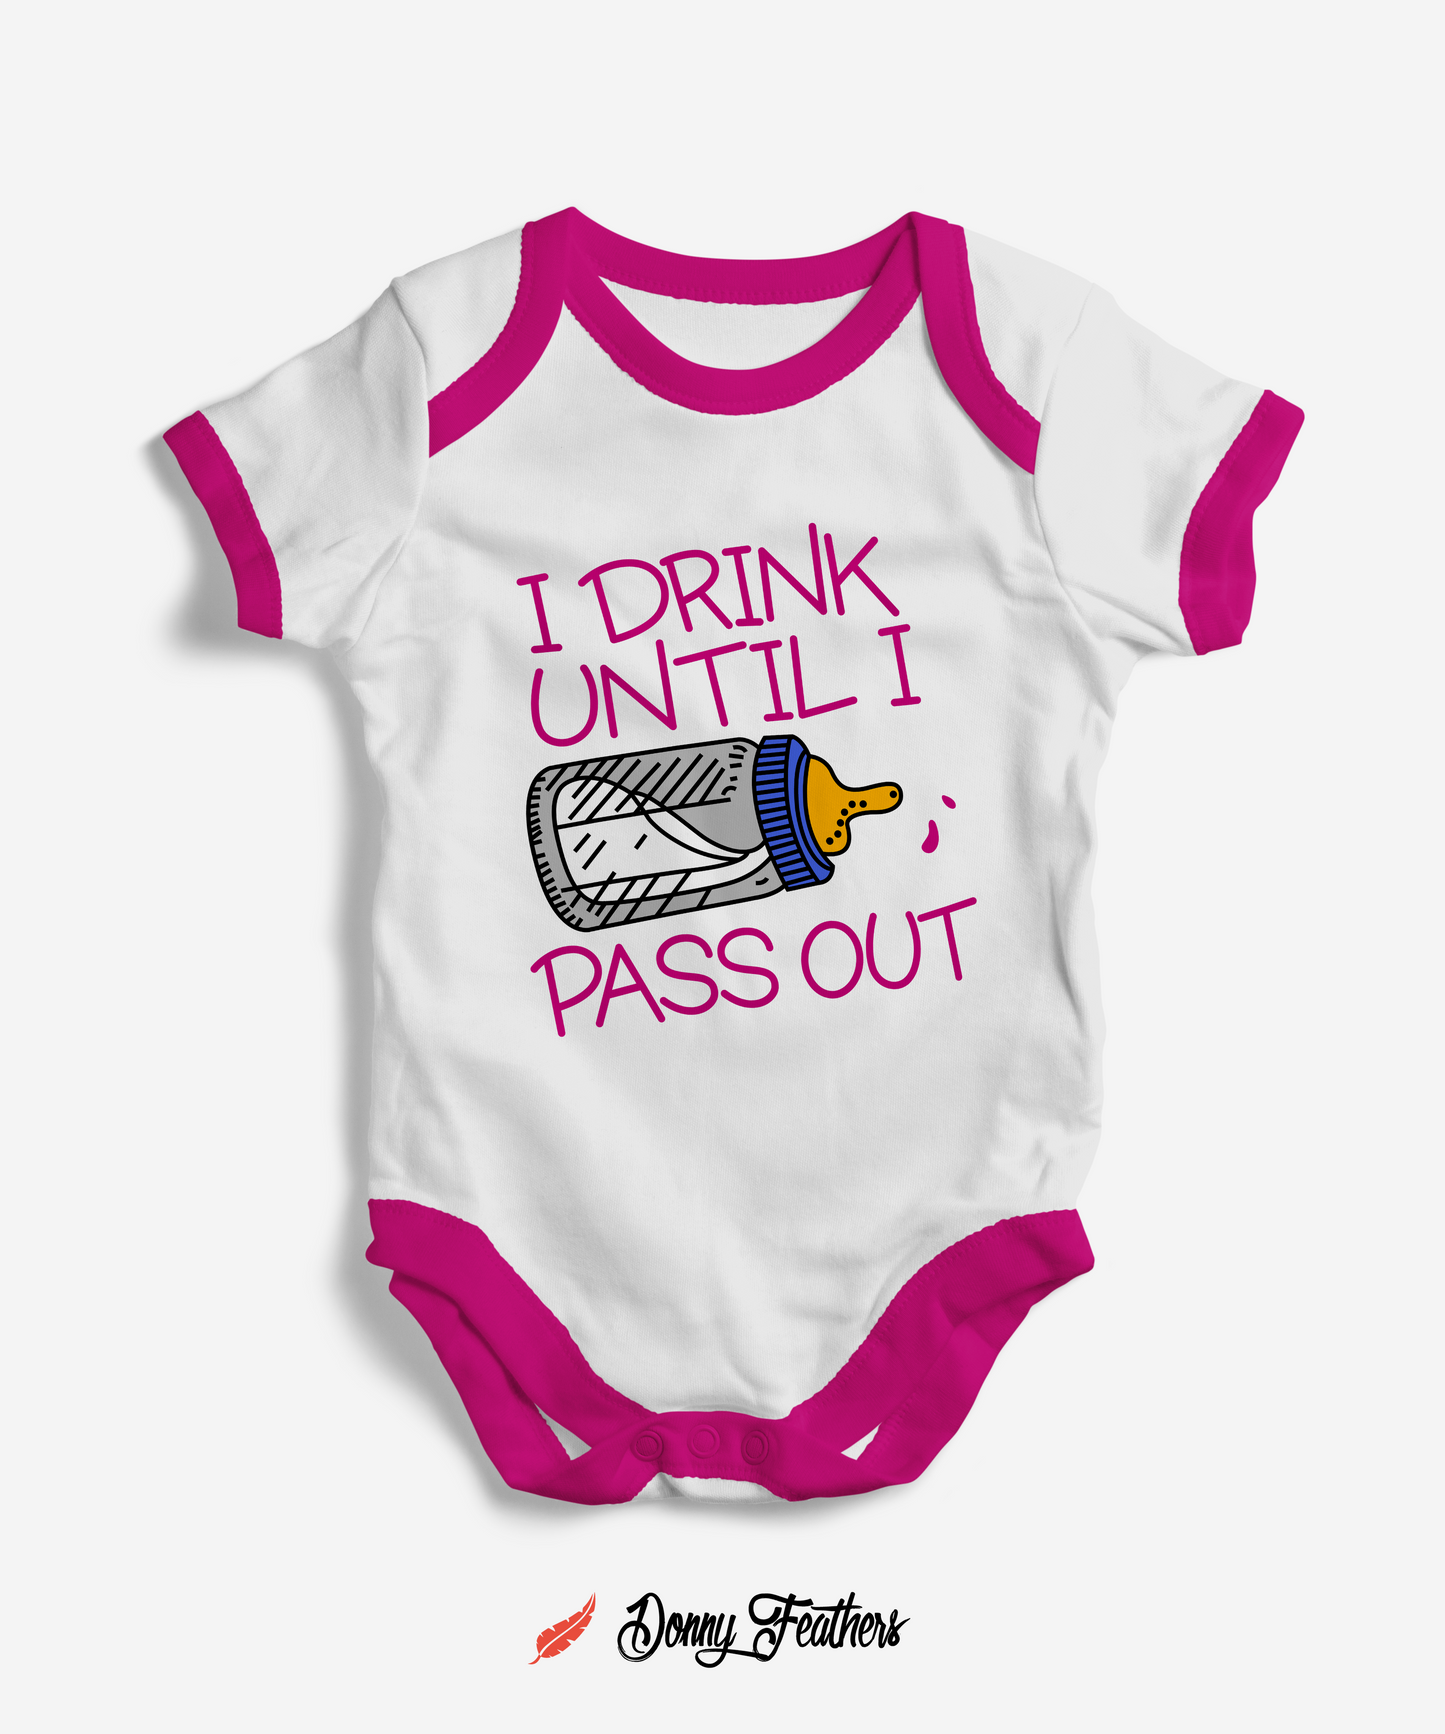 Baby Bodysuits | I Drink Until I Pass Out Romper (Pink) By: Donny Feathers